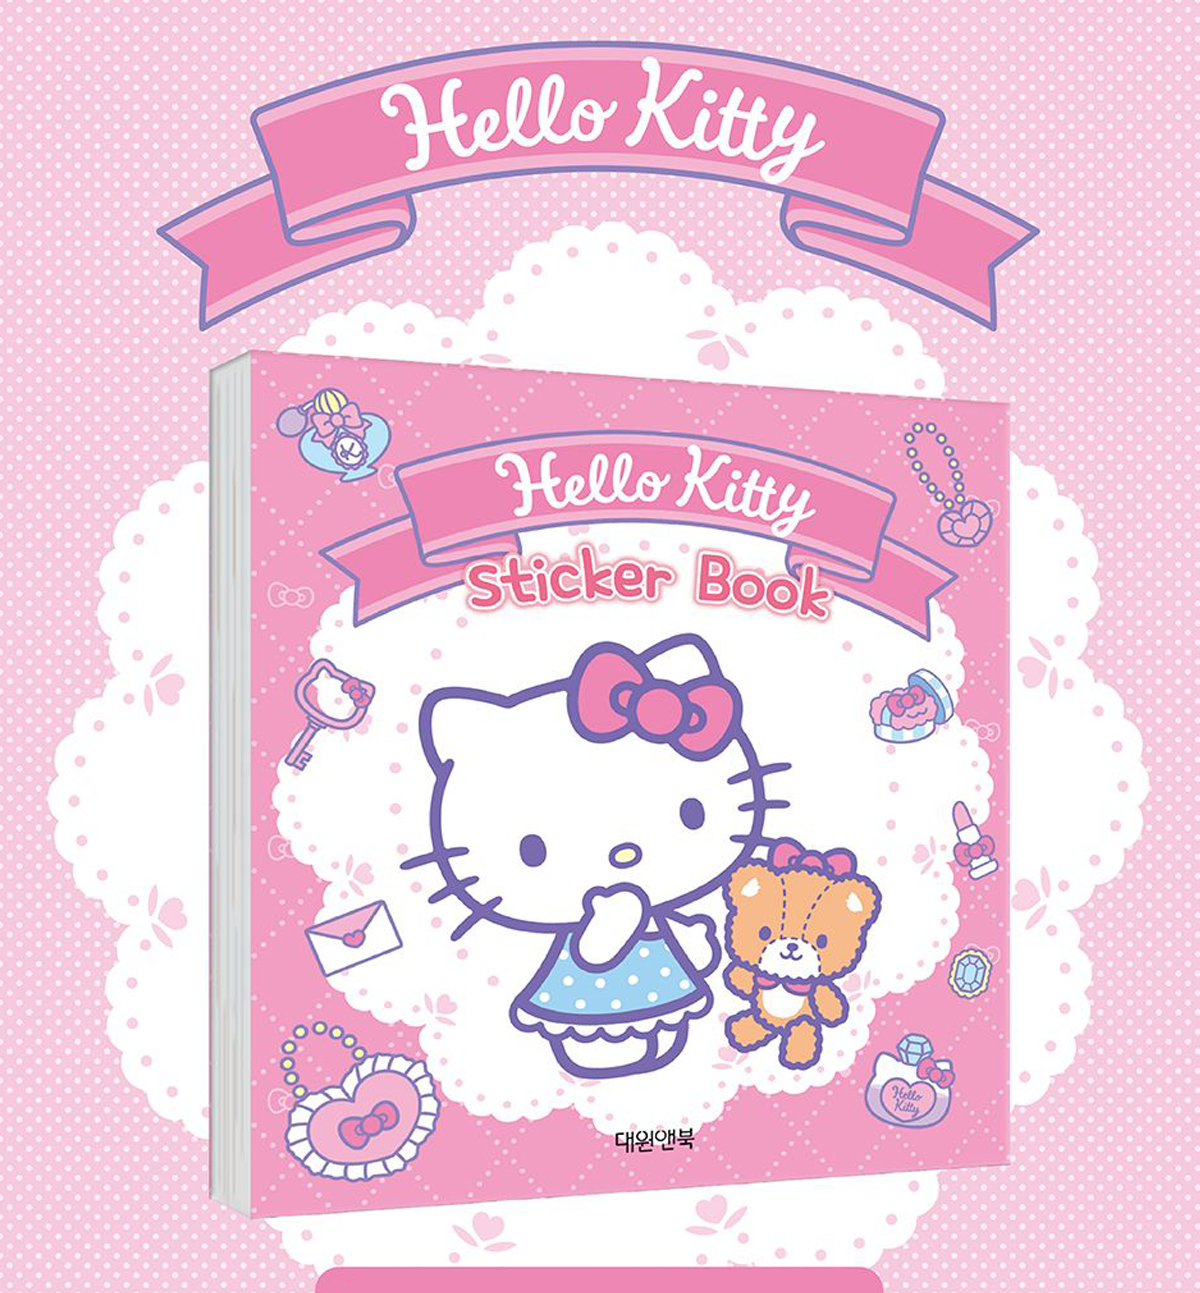 Hello Kitty Sticker Book with 200+ Stickers